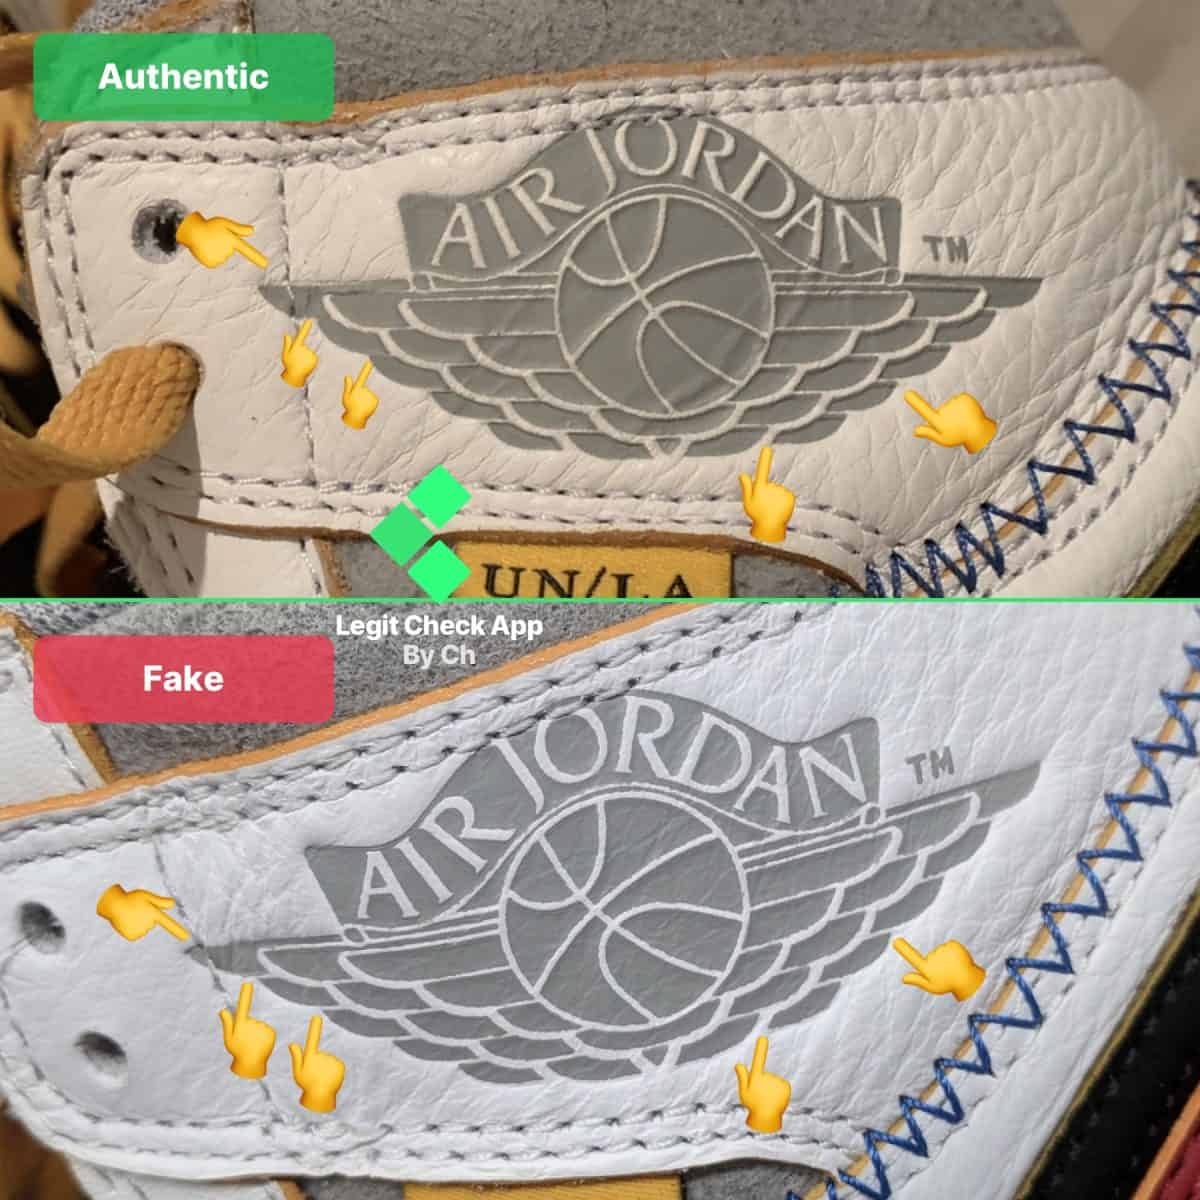 How To Tell If My Jordan 1 Union Is Fake